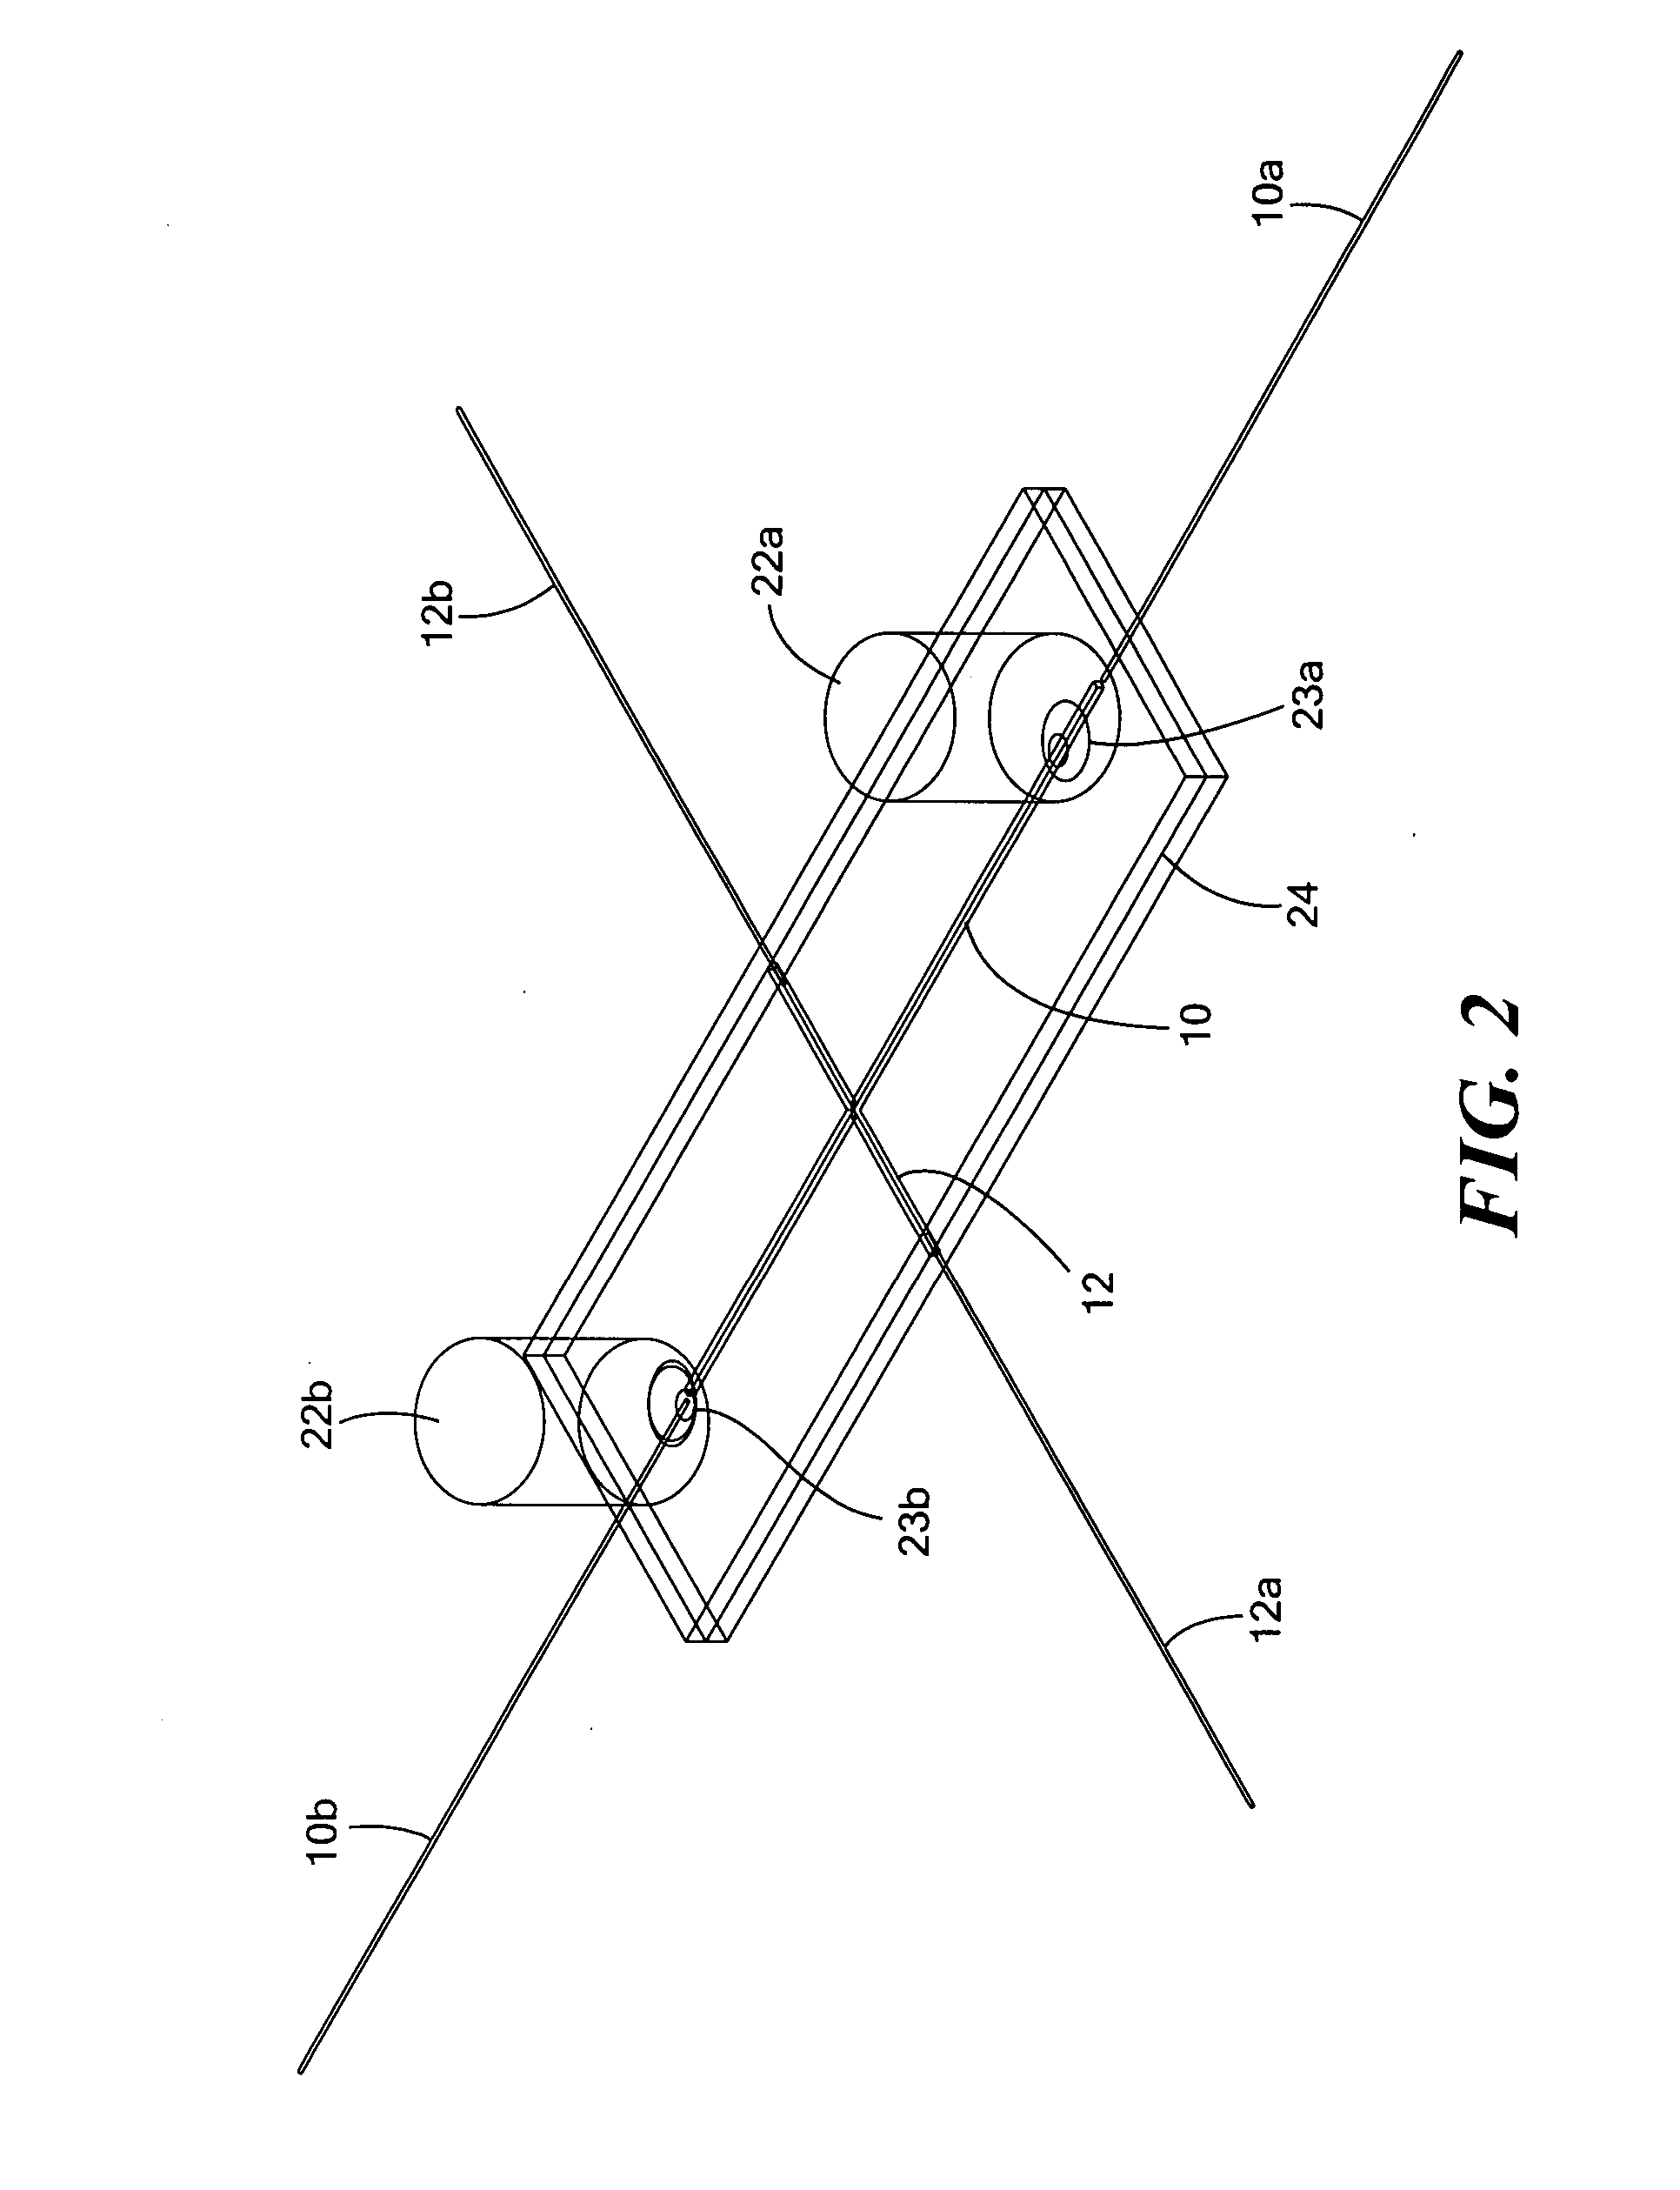 Method and apparatus for precise selection and extraction of a focused component in isoelectric focusing performed in micro-channels